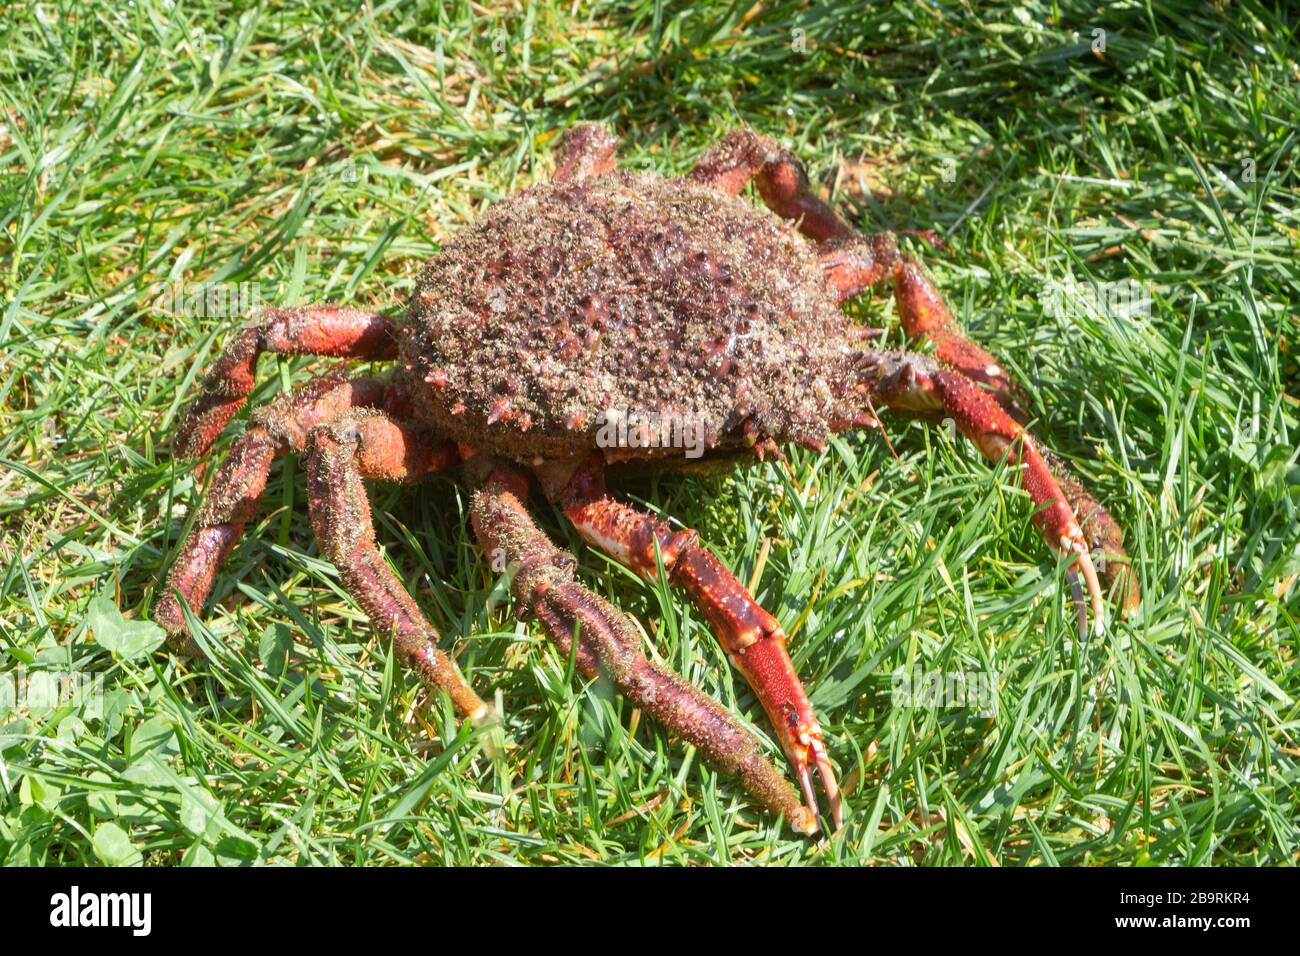 Alive spider crabs on grass after fishing in Brittany Stock Photo